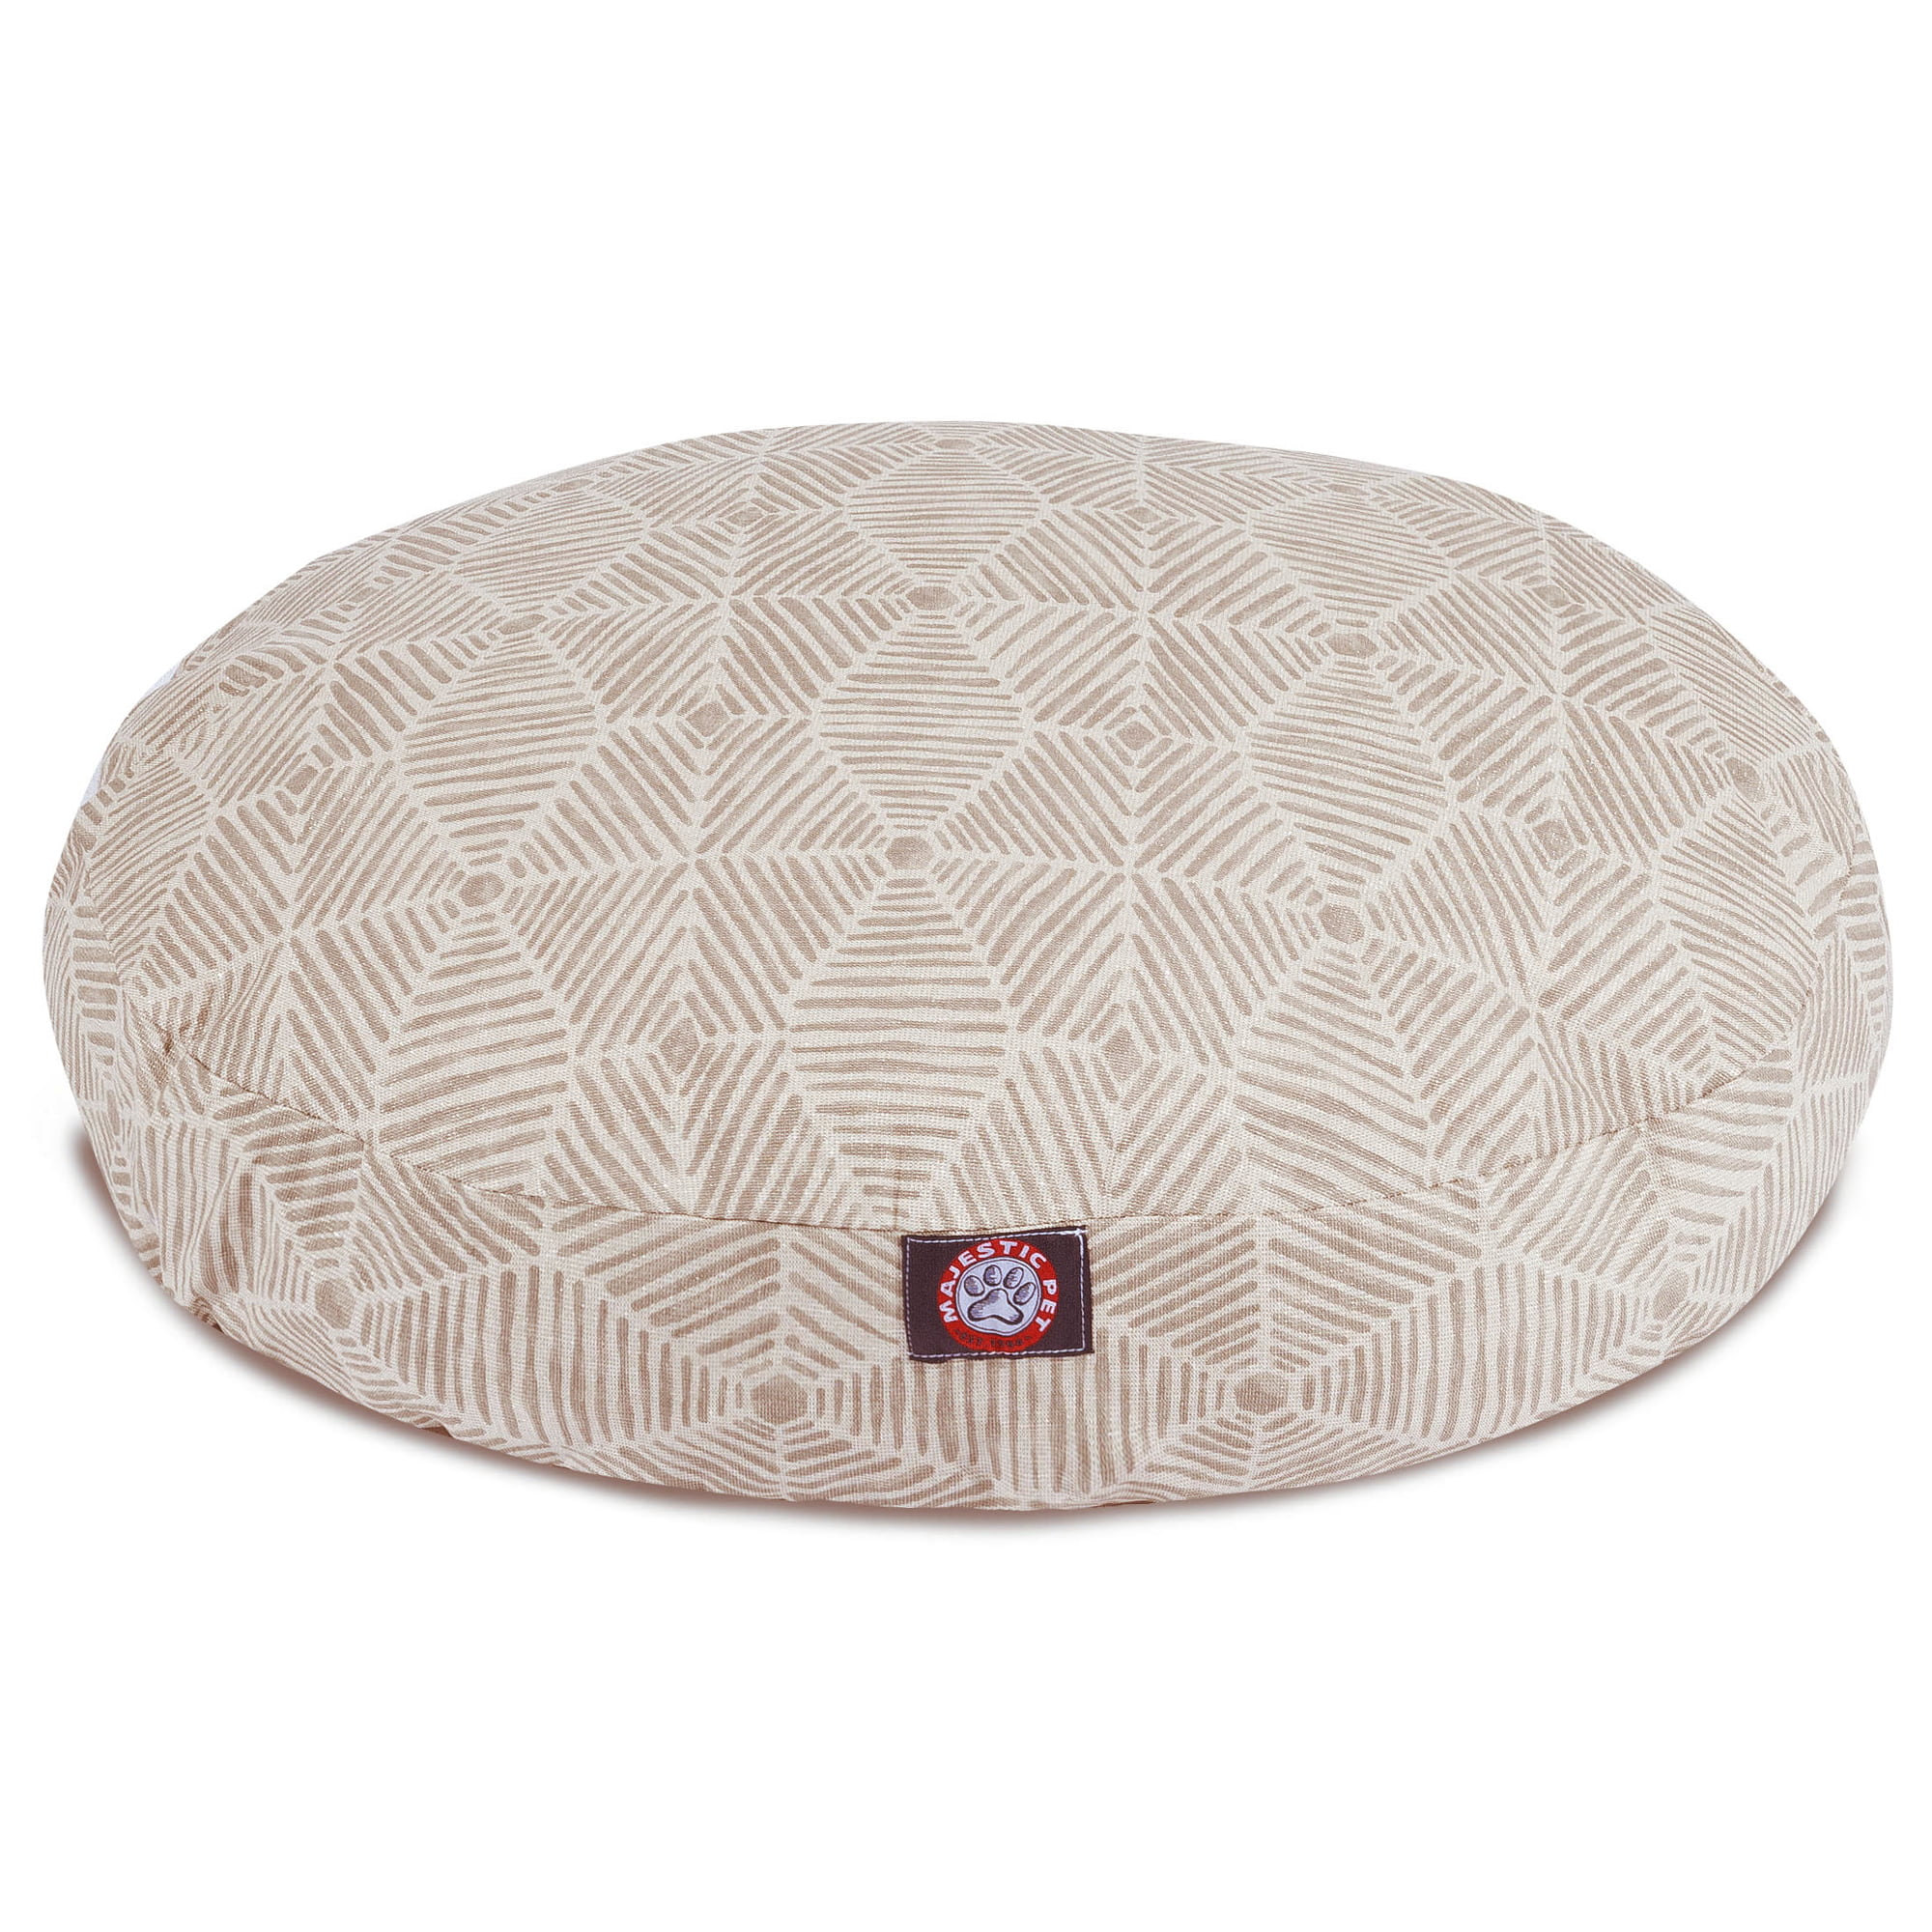 Majestic Pet | Charlie Round Pet Bed For Dogs, Removable Cover